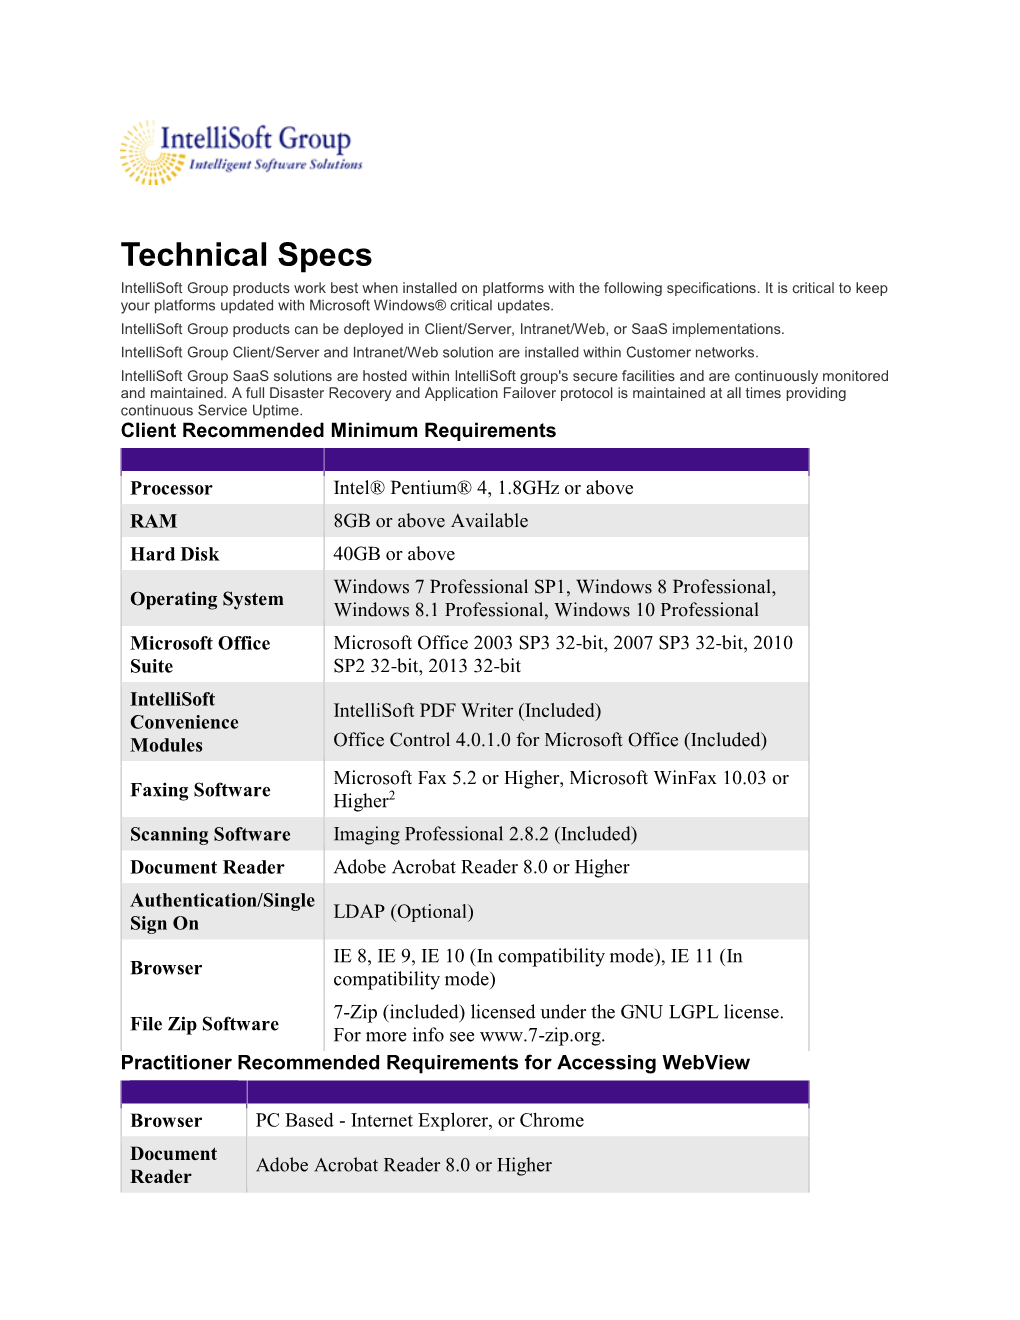 Technical Specs Intellisoft Group Products Work Best When Installed on Platforms with the Following Specifications